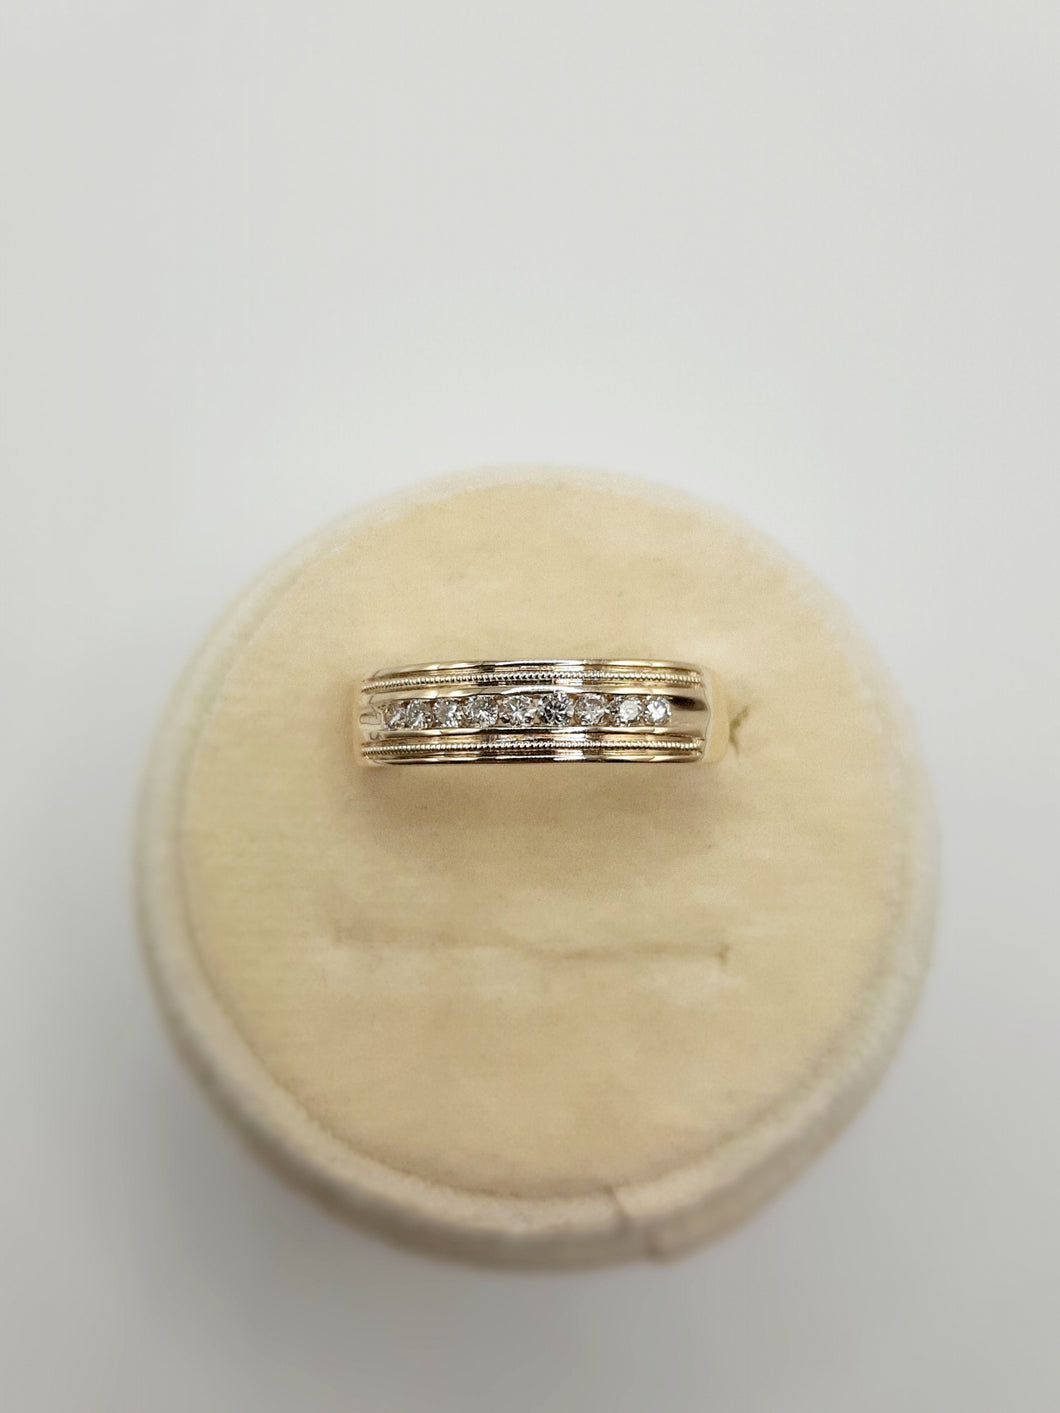 10Kt Yellow Gold Channel Band with Beaded Edges Featuring .26 Carats of Diamonds